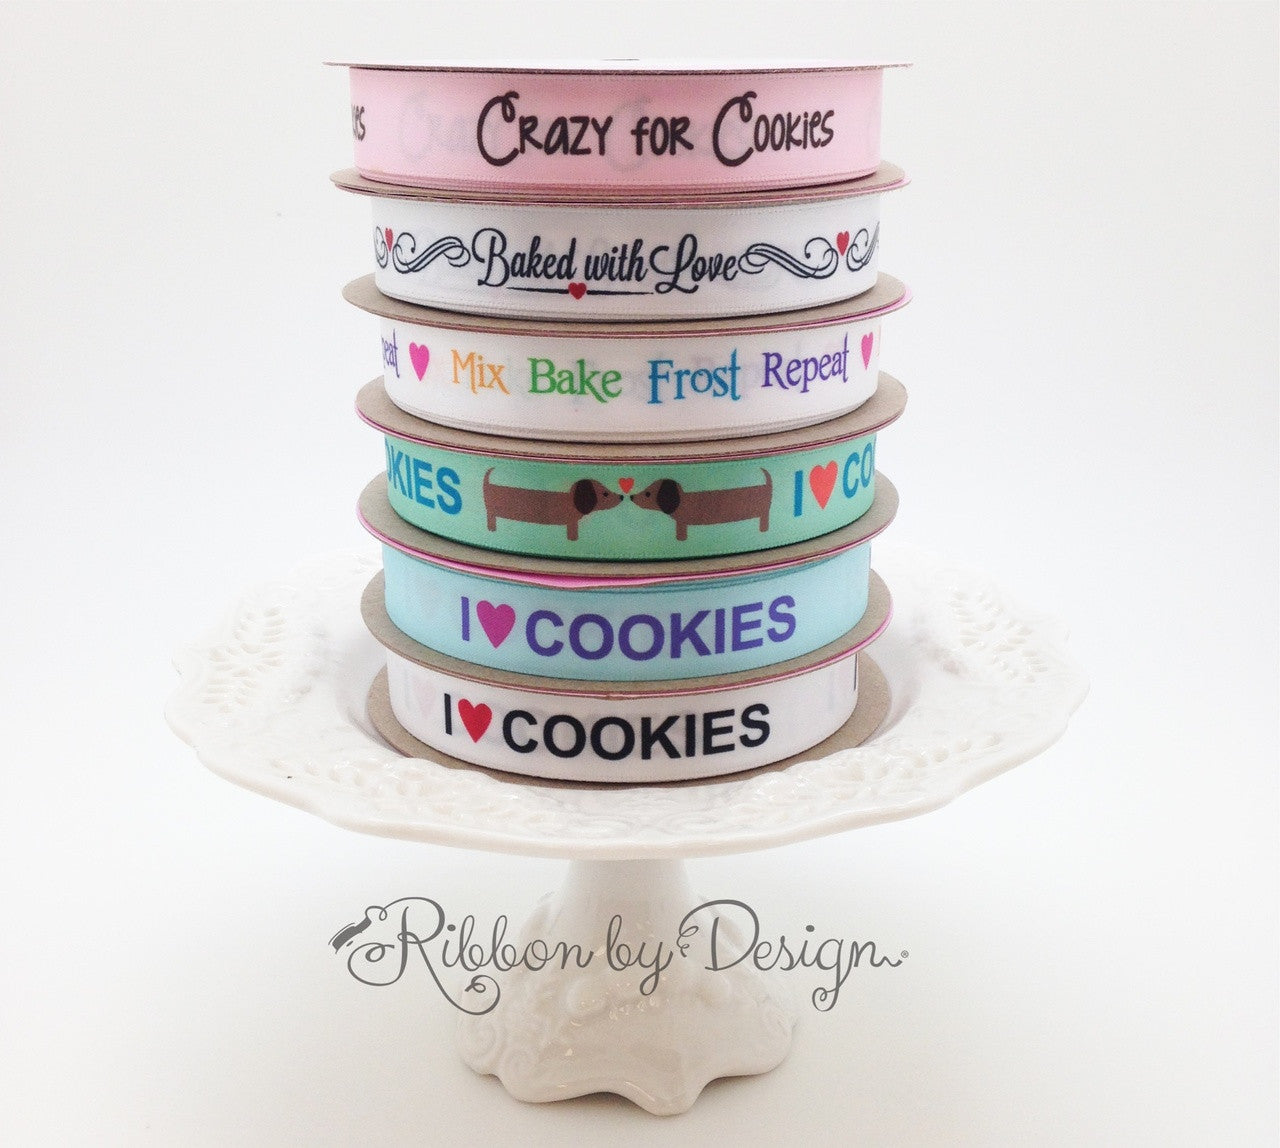 Baked with Love this the perfect addition to all our baking themed ribbons! Be sure to add it to your special baked gifts!